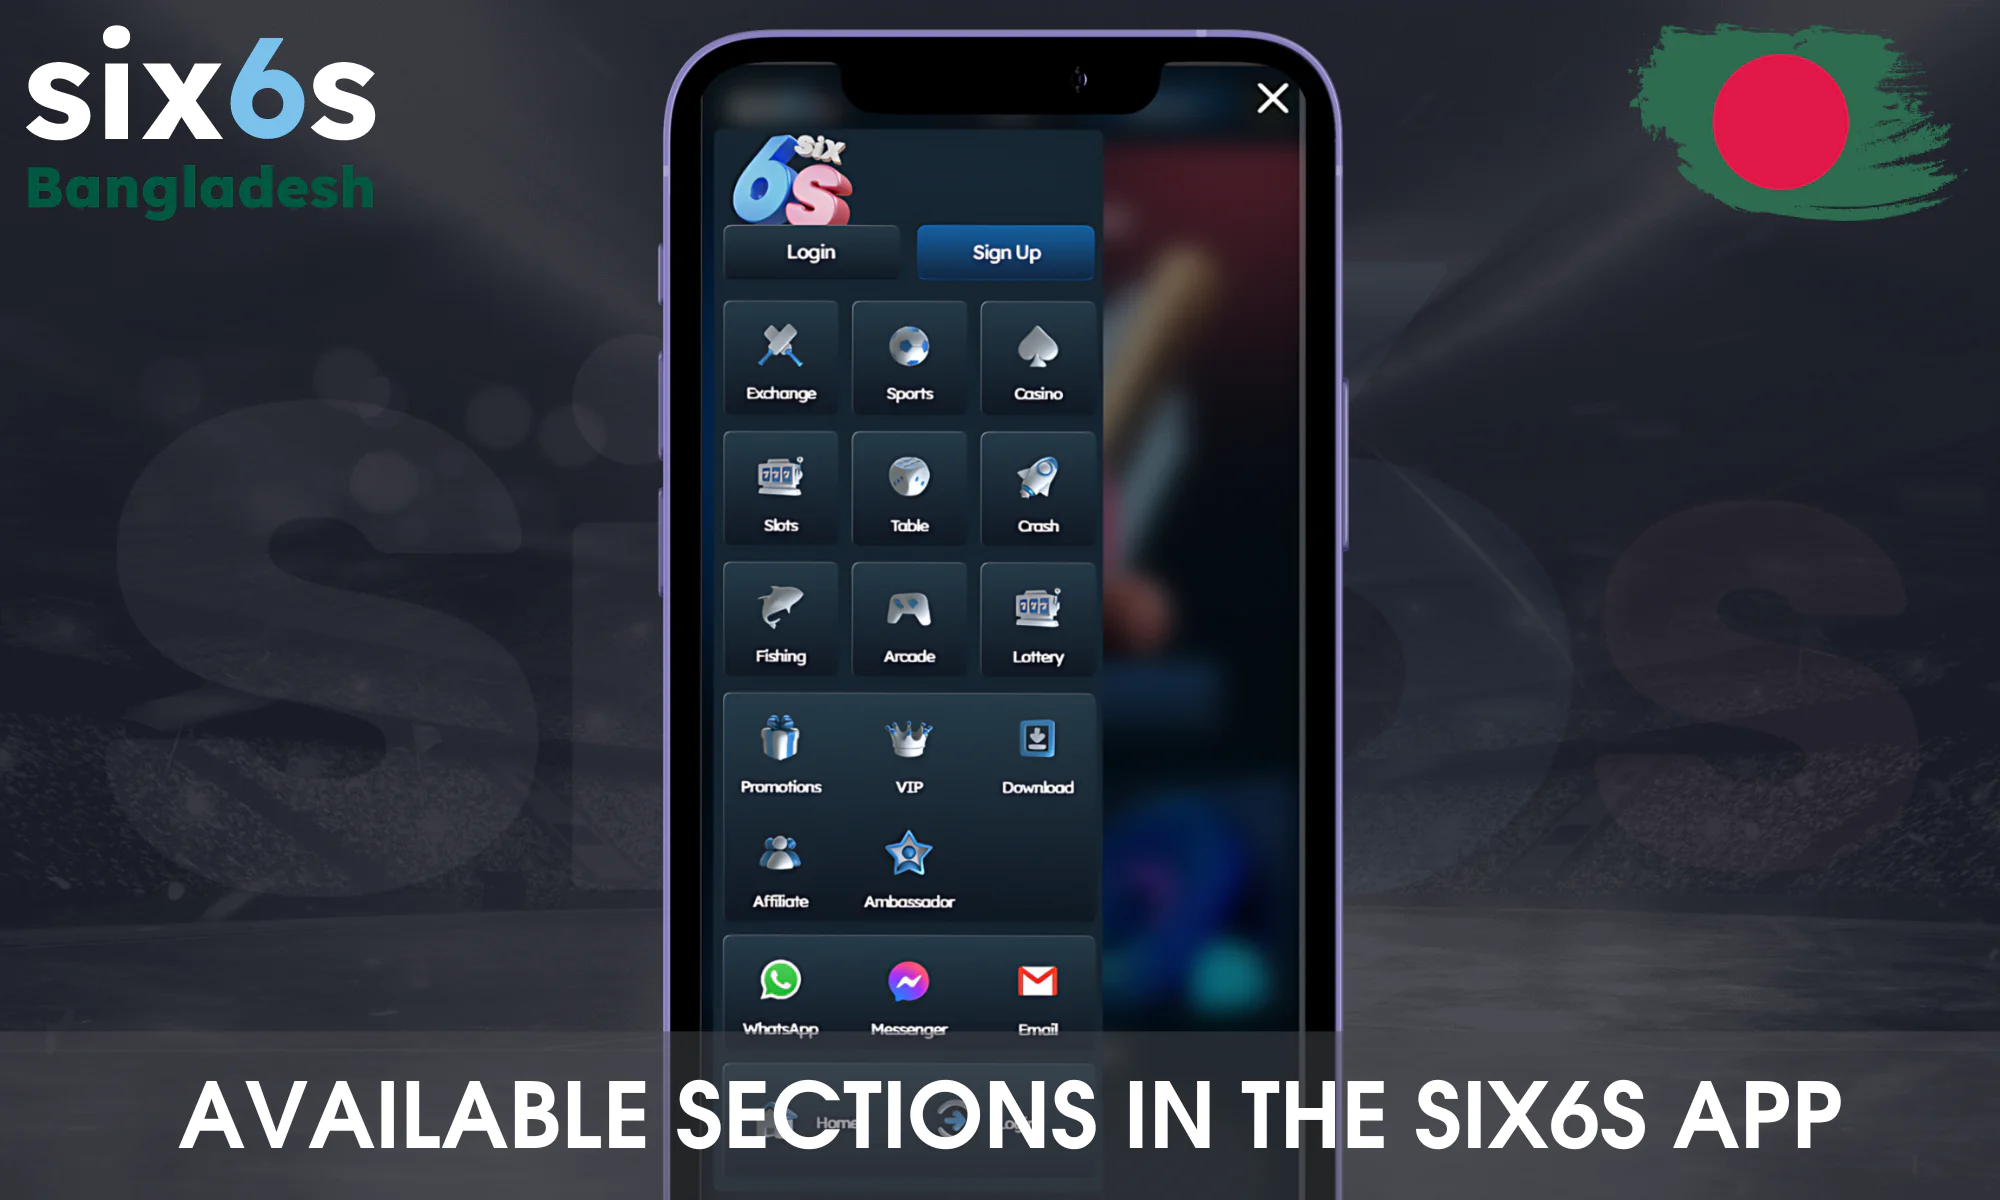 The Six6s app offers various categories of entertainment, from sports betting to various slots